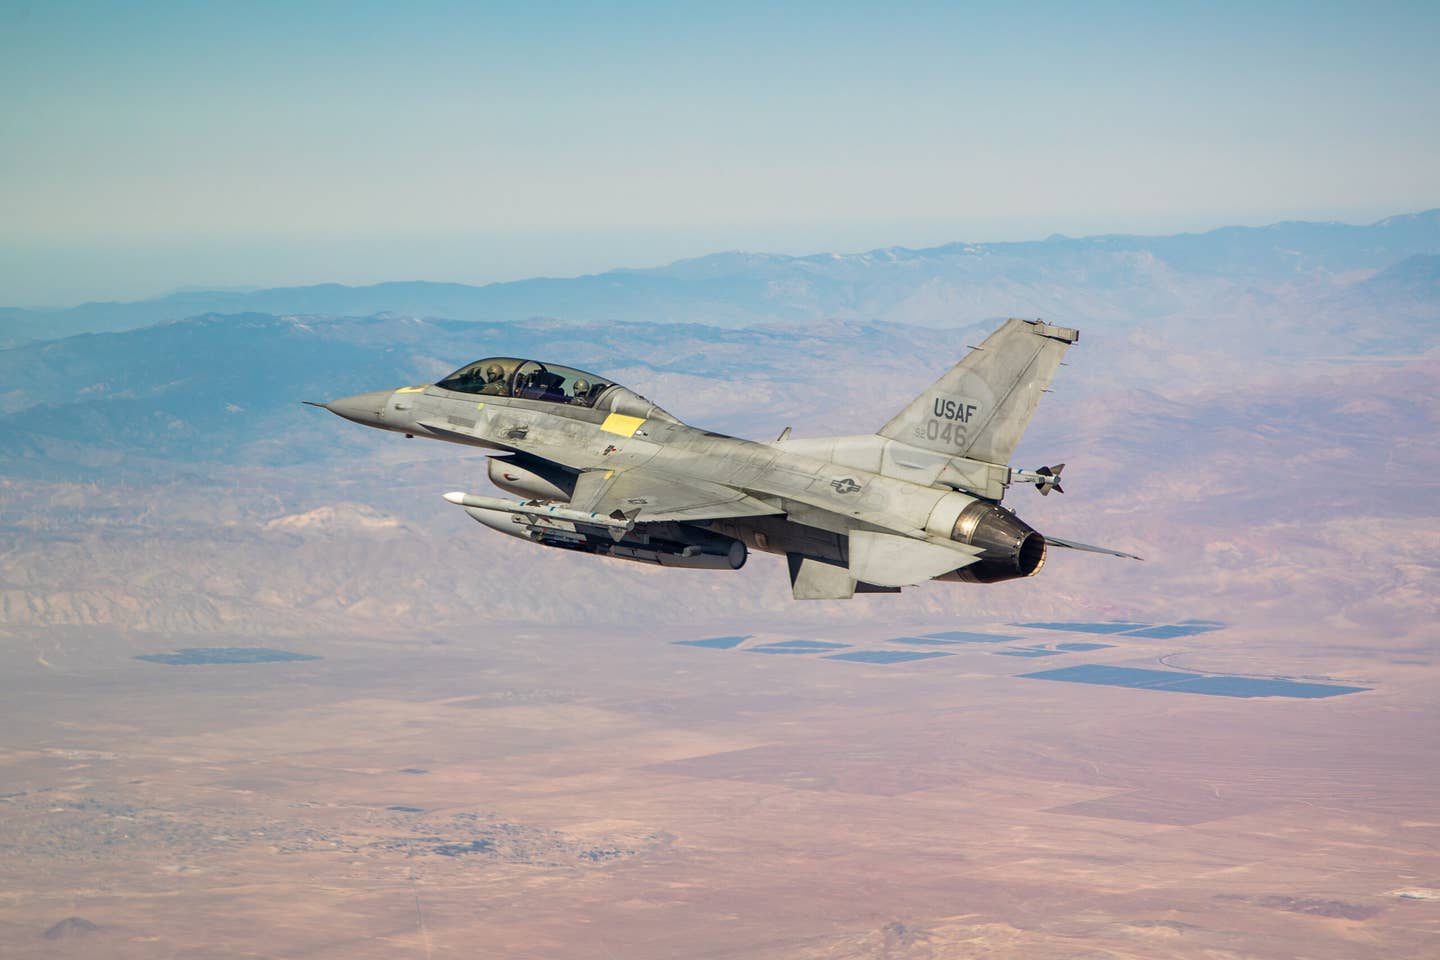 A ROKAF F-16D deployed at Edwards Air Force Base, California, to conduct tests under the&nbsp;South Korean F-16 upgrade program. <em>U.S. Air Force</em>